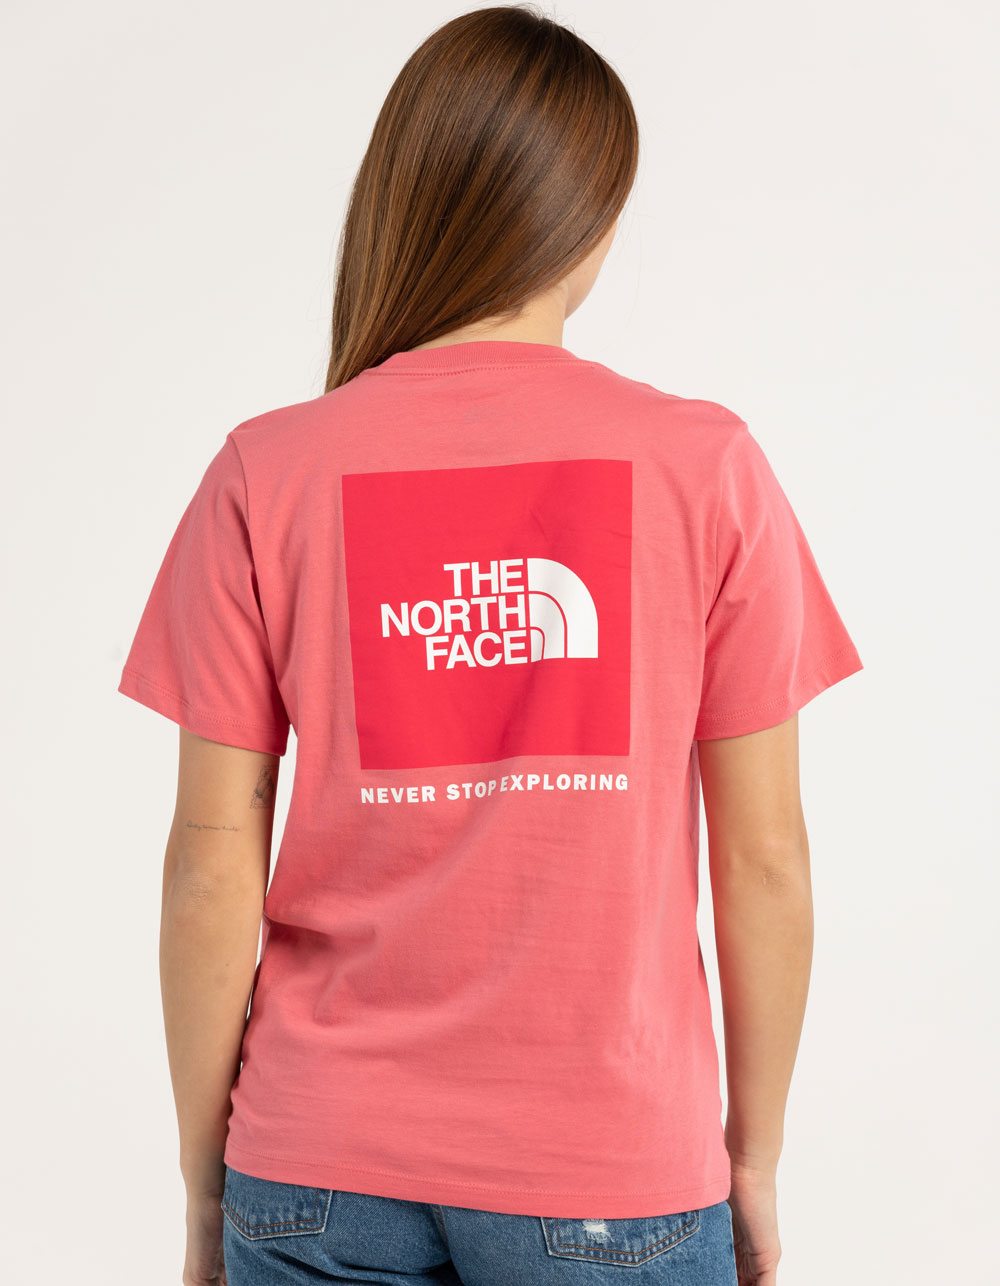 THE NORTH FACE Never Stop Exploring Womens Tee - PINK | Tillys